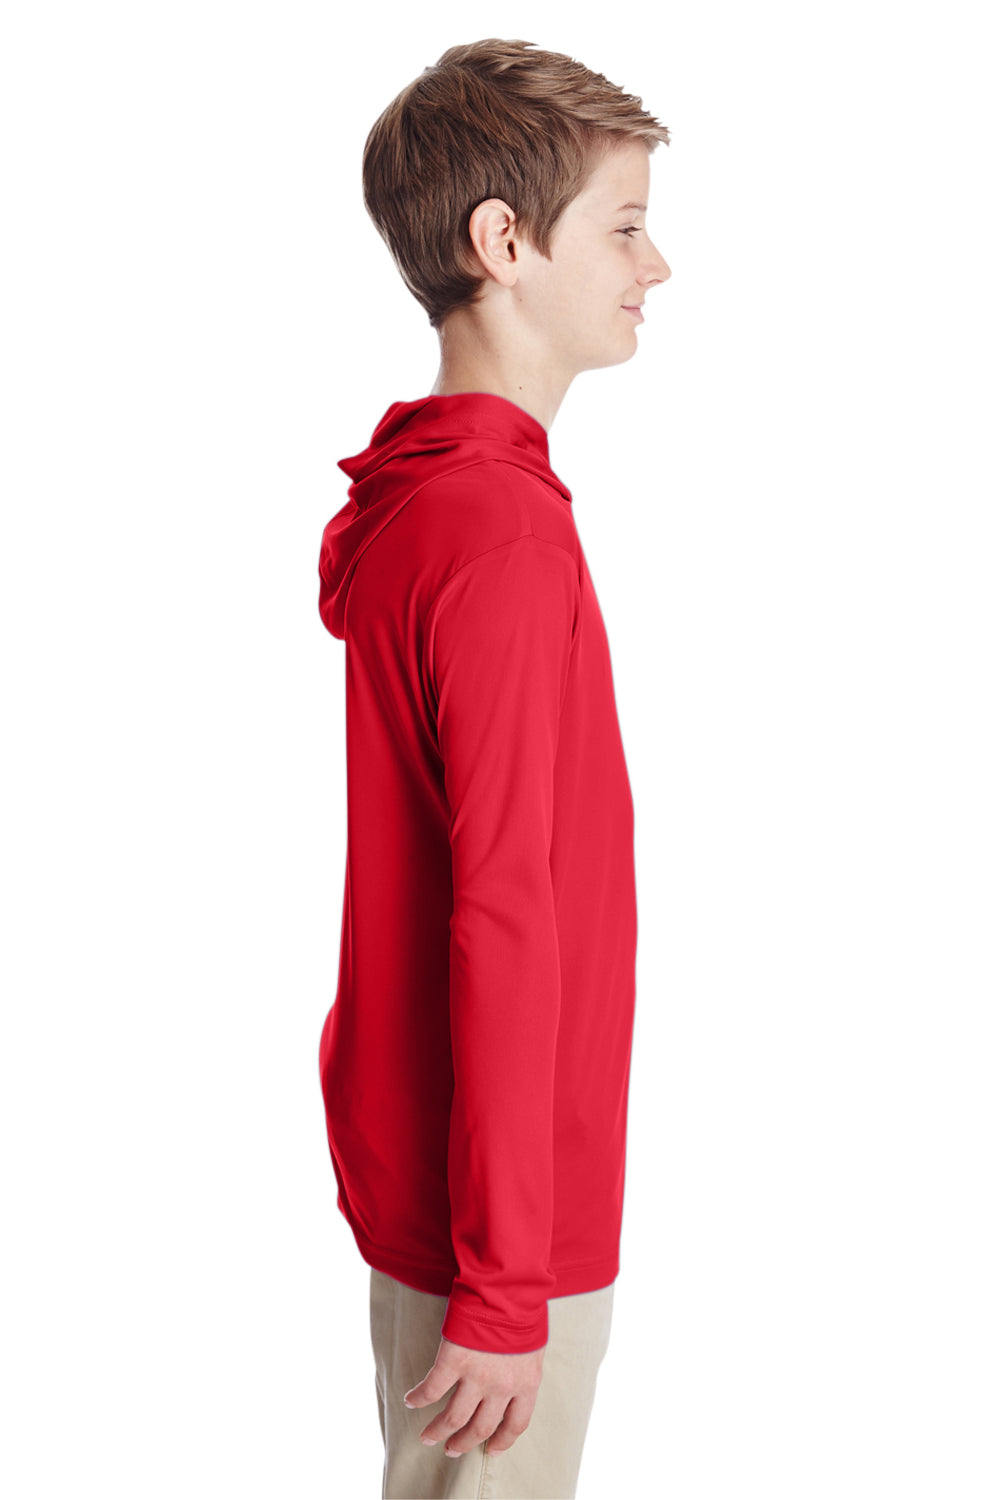 Team 365 TT41Y Youth Zone Performance Moisture Wicking Long Sleeve Hooded T-Shirt Hoodie Red Side